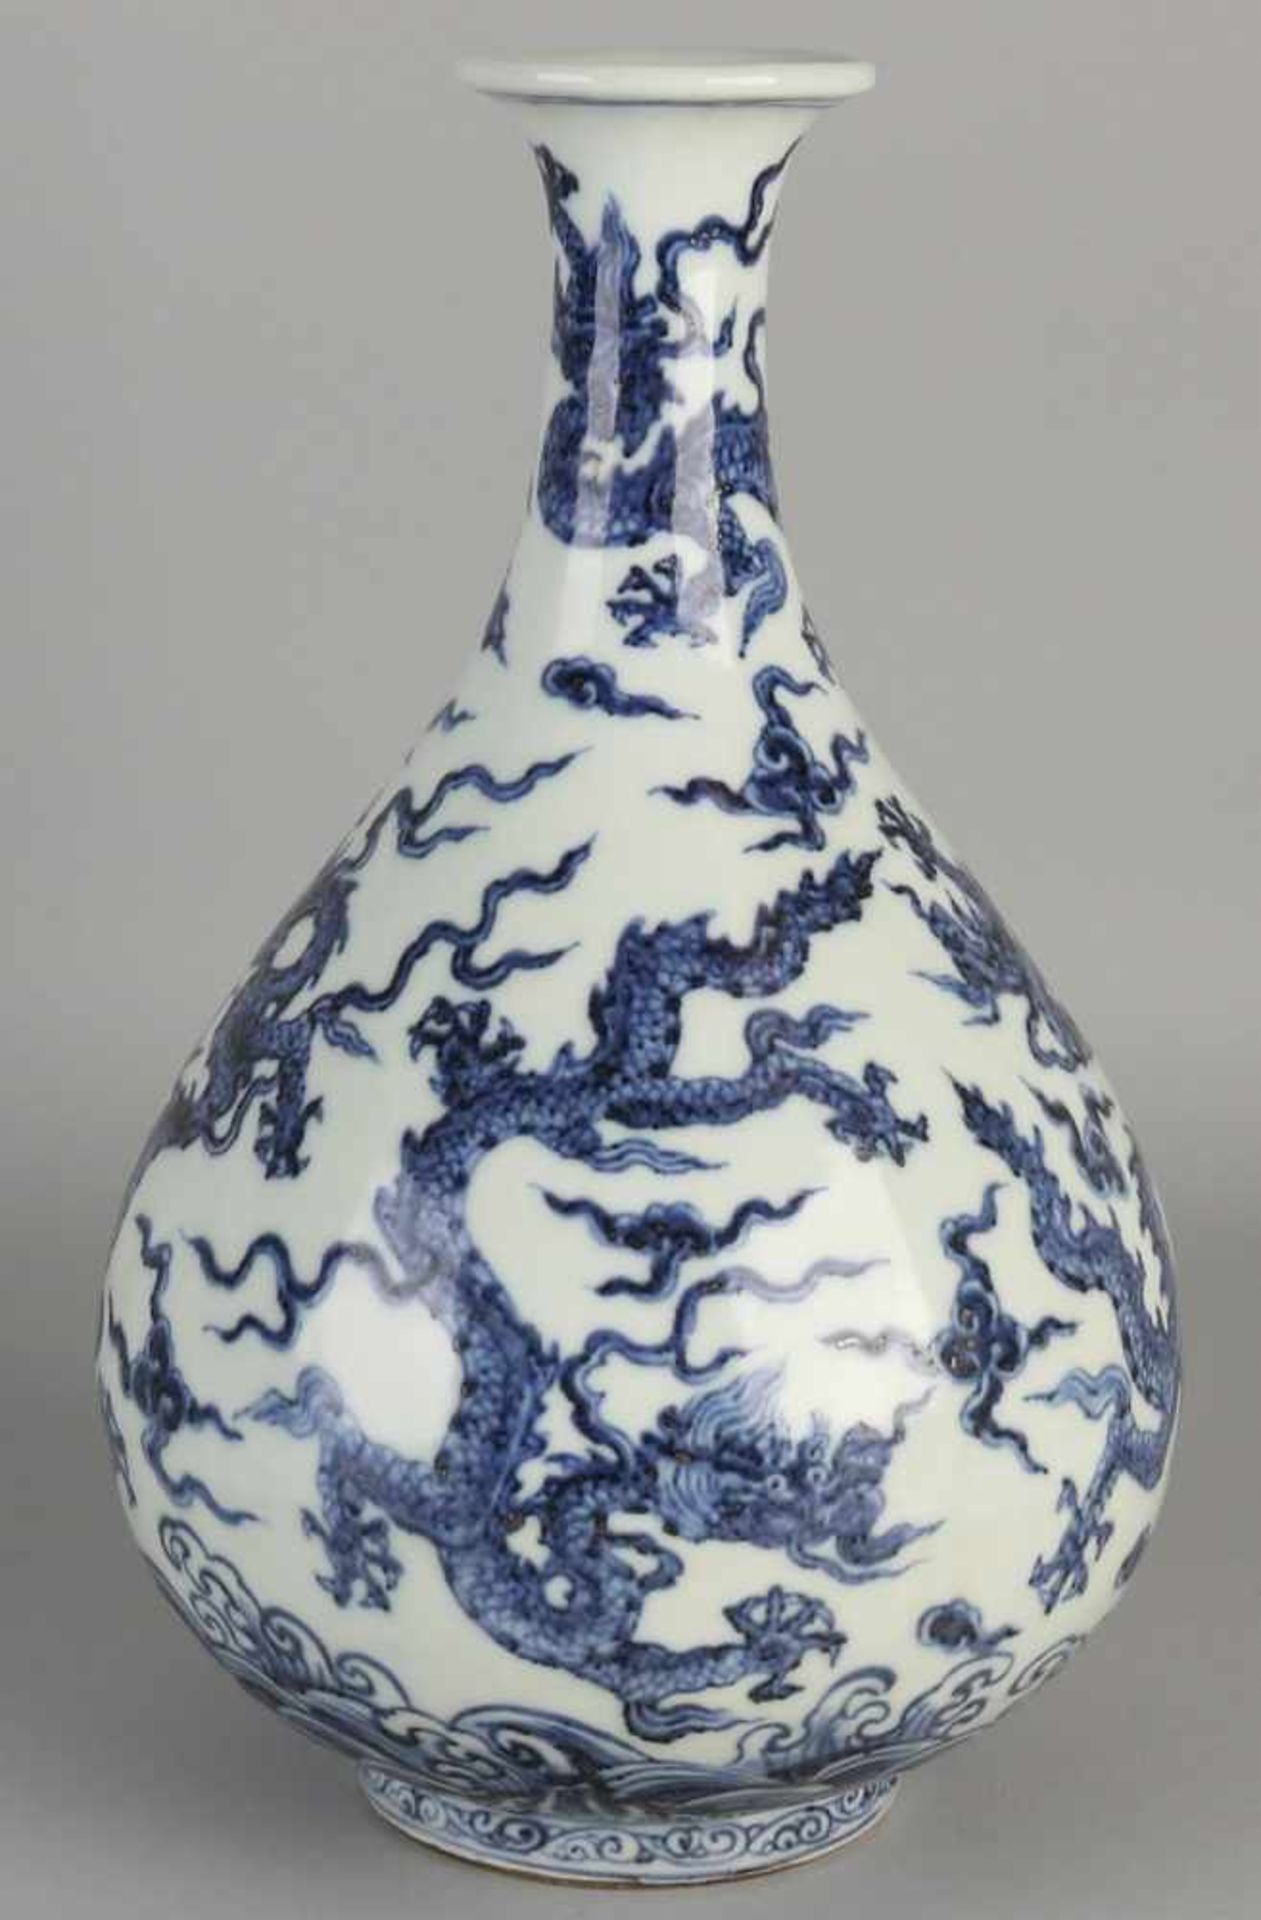 Chinese porcelain vase with dragon decoration in the clouds. Size: ø 29 x 16.5 cm. In good